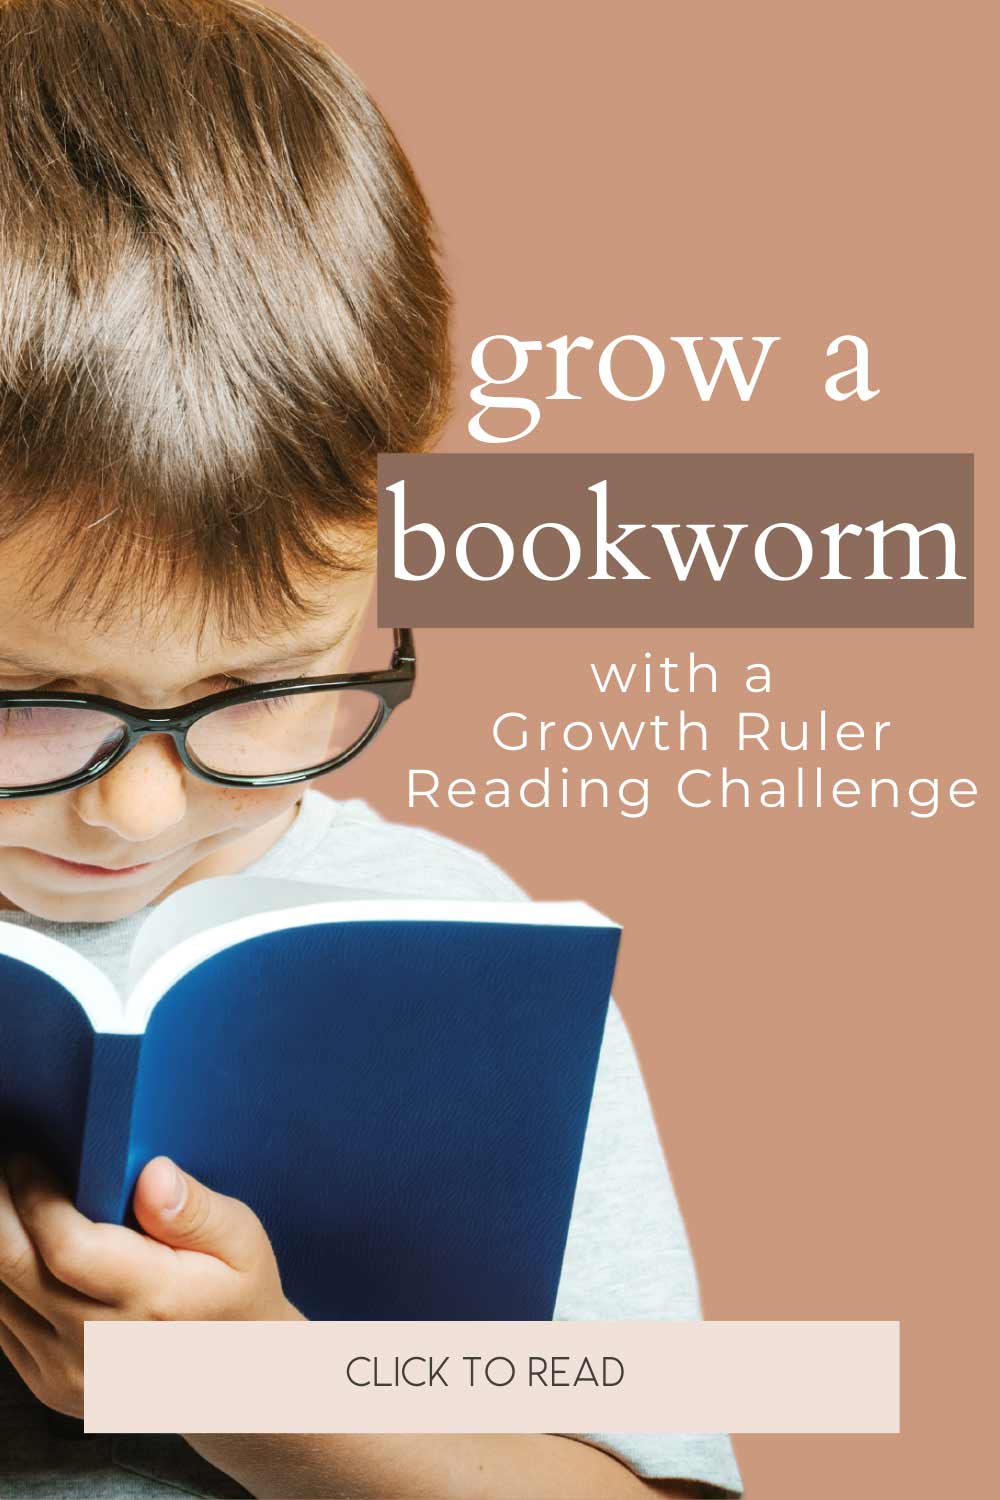 Journey Through Books: A Growth Ruler Reading Challenge